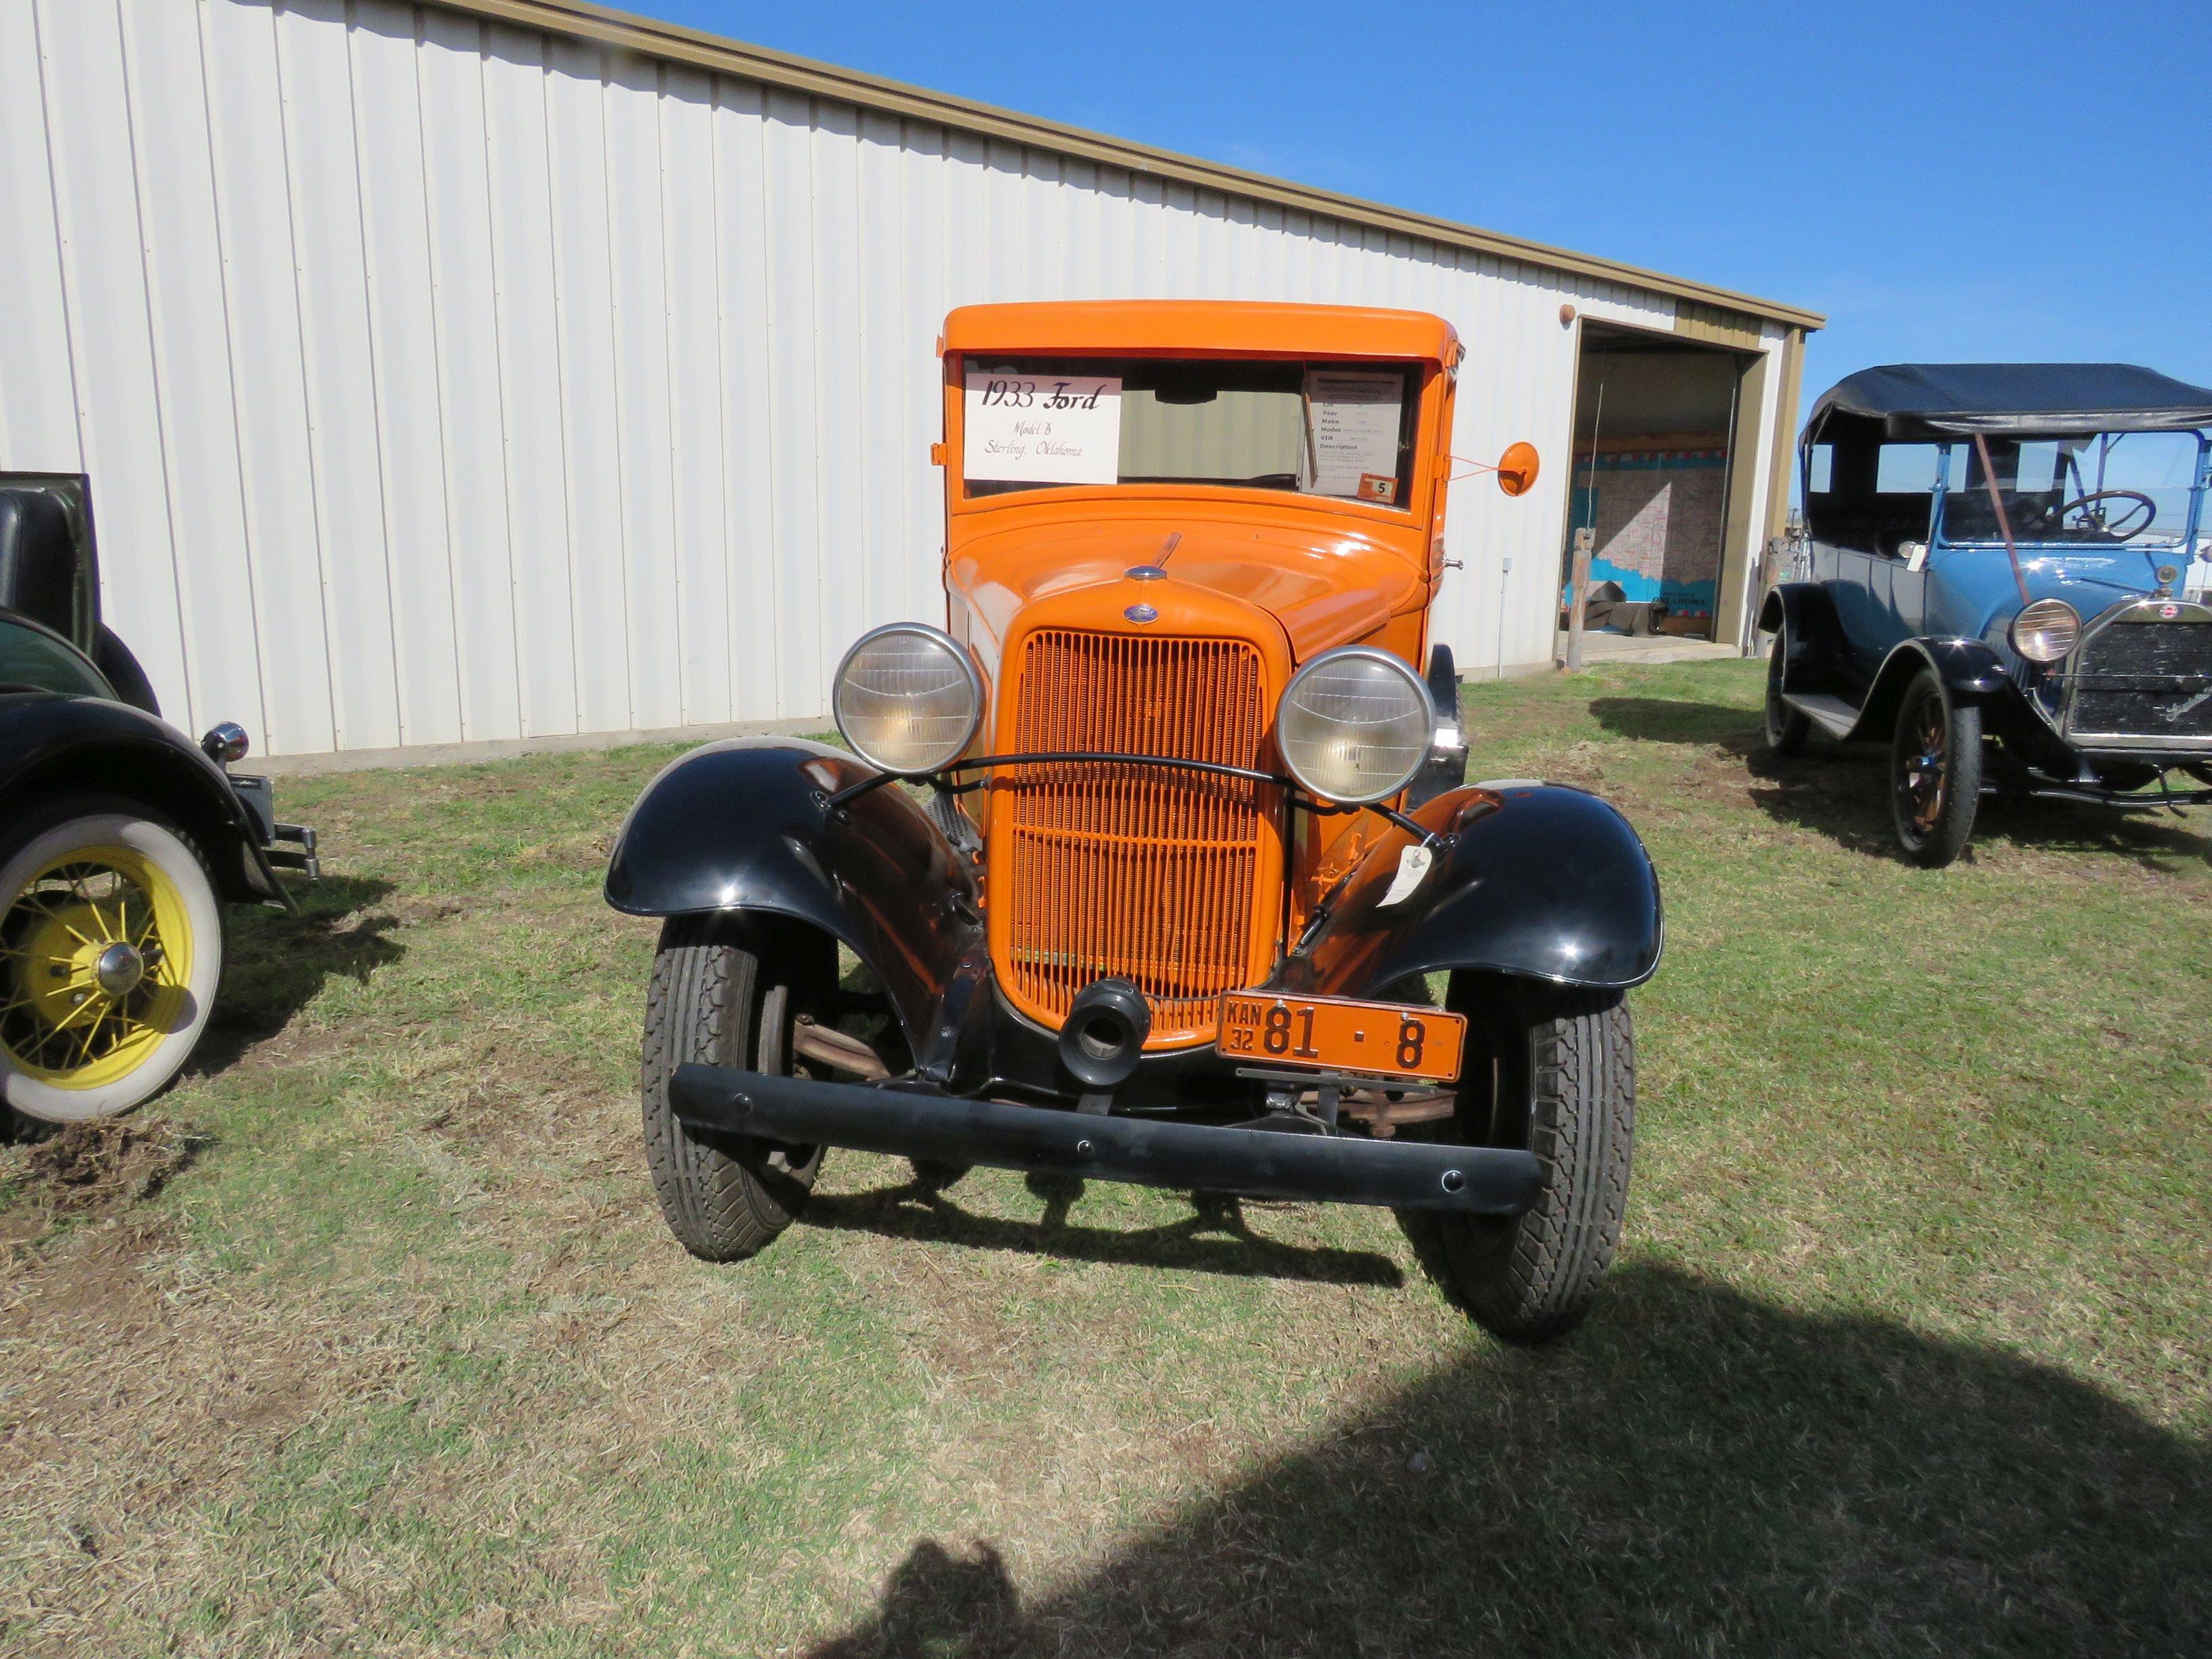 1933 1/2 Ford Model B Stake Bed Truck